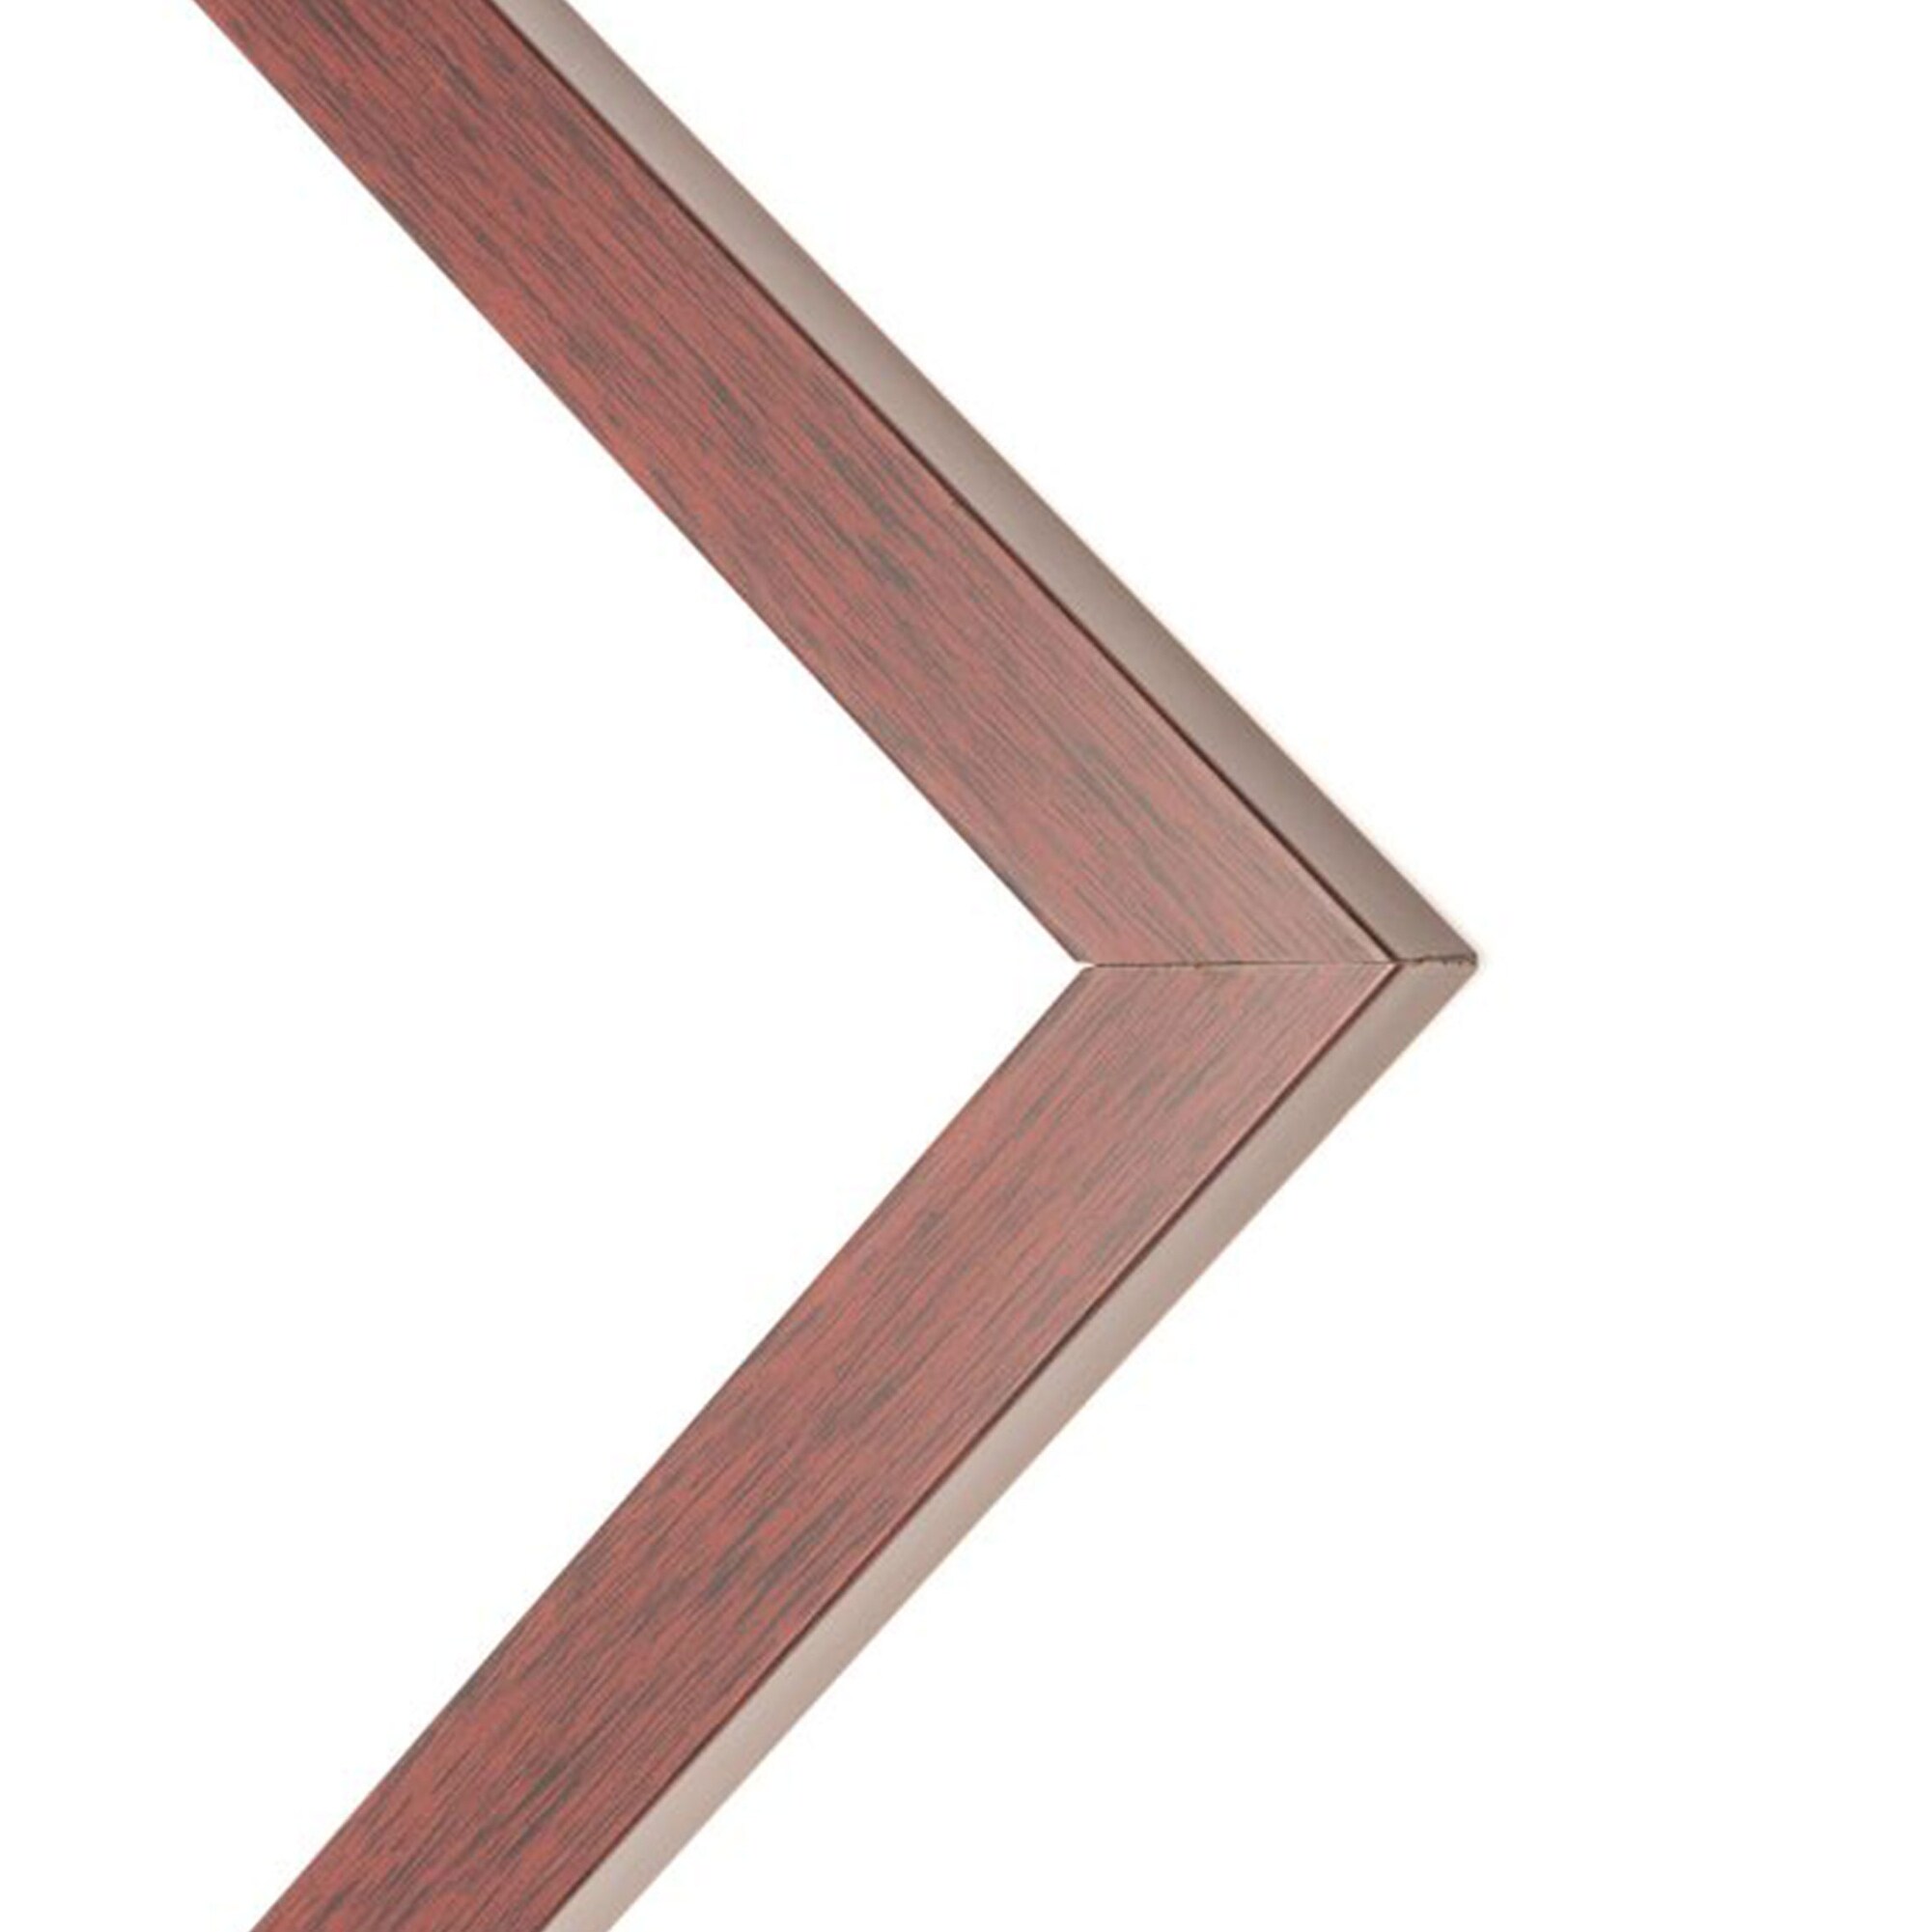 https://ak1.ostkcdn.com/images/products/is/images/direct/2363fa9cd7f7395d8e840da3ebefda9e8a470026/10x20---10-x-20-Cherry-Flat-Solid-Wood-Frame-with-UV-Framer%27s-Acrylic-%26-Foam-Board-Backing---Great-For-a-Photo%2C-Pos.jpg